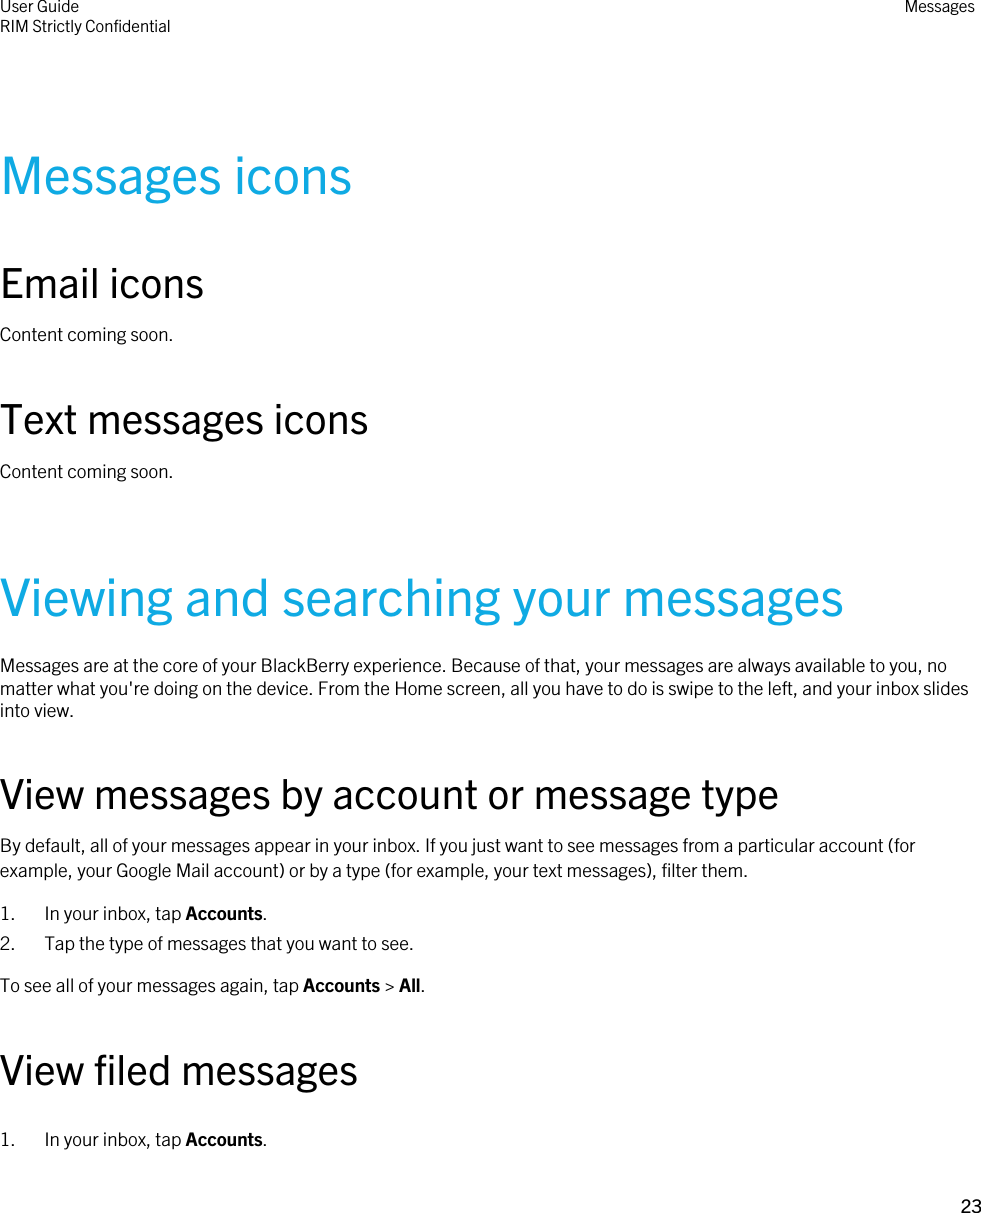 Messages iconsEmail iconsContent coming soon.Text messages iconsContent coming soon.Viewing and searching your messagesMessages are at the core of your BlackBerry experience. Because of that, your messages are always available to you, no matter what you&apos;re doing on the device. From the Home screen, all you have to do is swipe to the left, and your inbox slides into view.View messages by account or message typeBy default, all of your messages appear in your inbox. If you just want to see messages from a particular account (for example, your Google Mail account) or by a type (for example, your text messages), filter them.1. In your inbox, tap Accounts.2. Tap the type of messages that you want to see.To see all of your messages again, tap Accounts &gt; All.View filed messages1. In your inbox, tap Accounts.User GuideRIM Strictly ConfidentialMessages23 